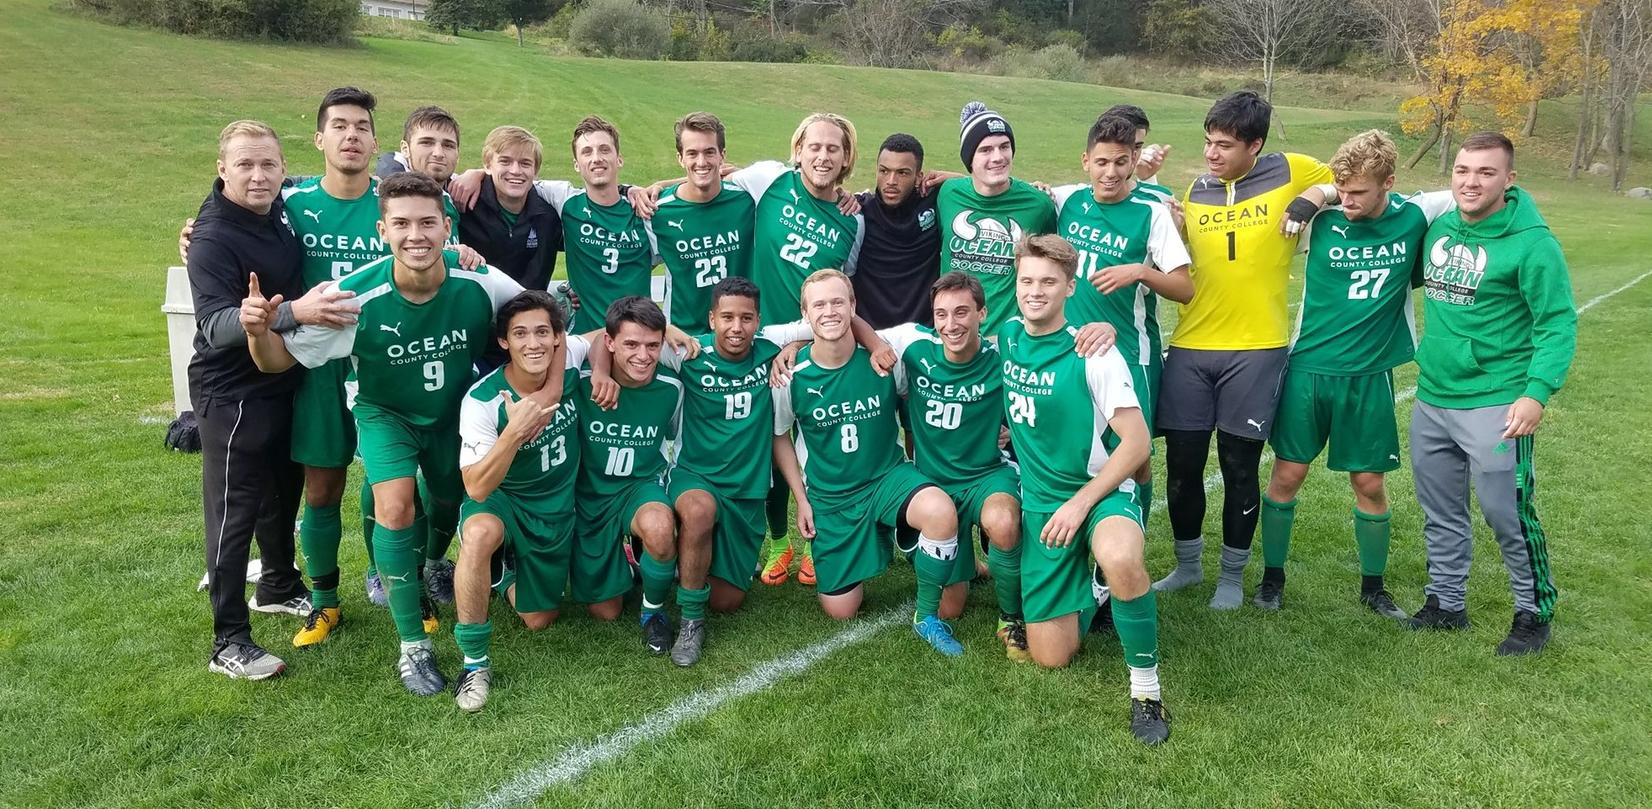 Andrade Shines as Vikings Defeat Sussex in PK Shootout to Advance to Region XIX Finals!